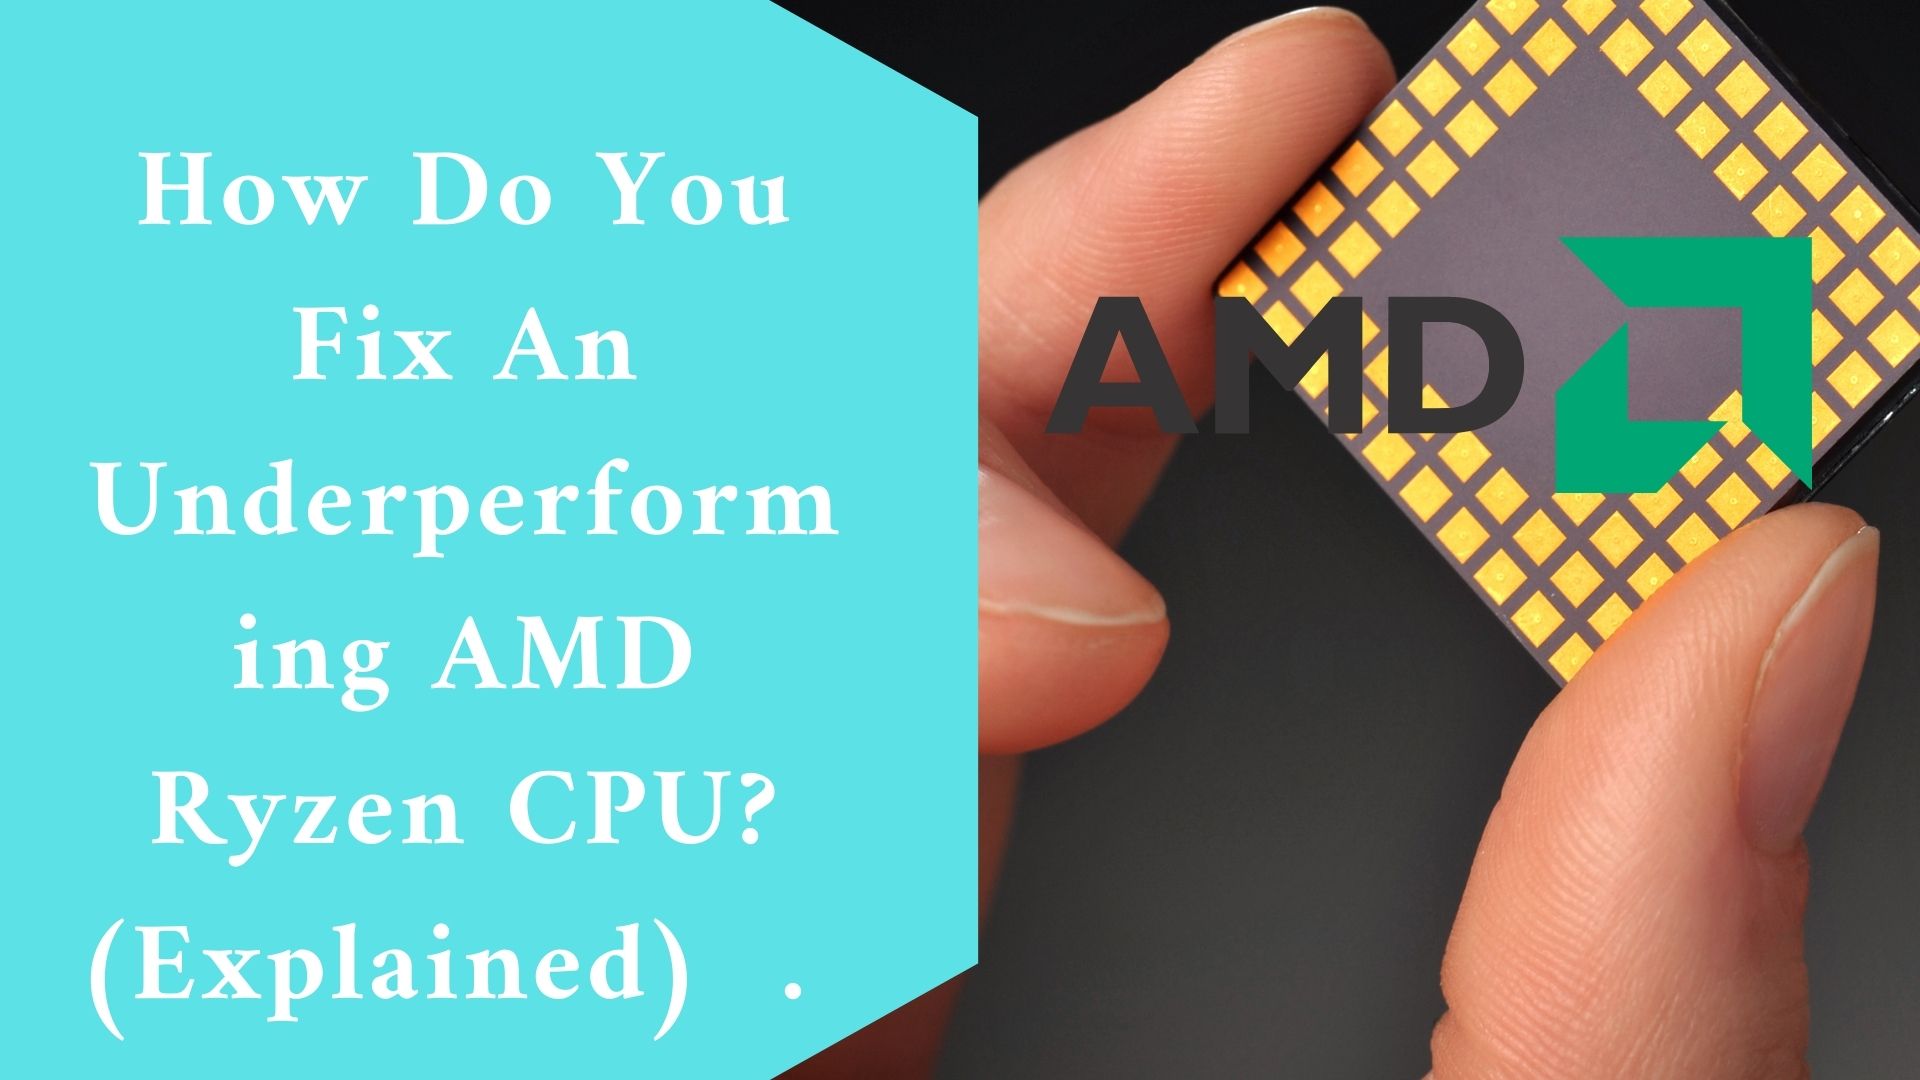 How Do You Fix An Underperforming AMD Ryzen CPU? (Explained)